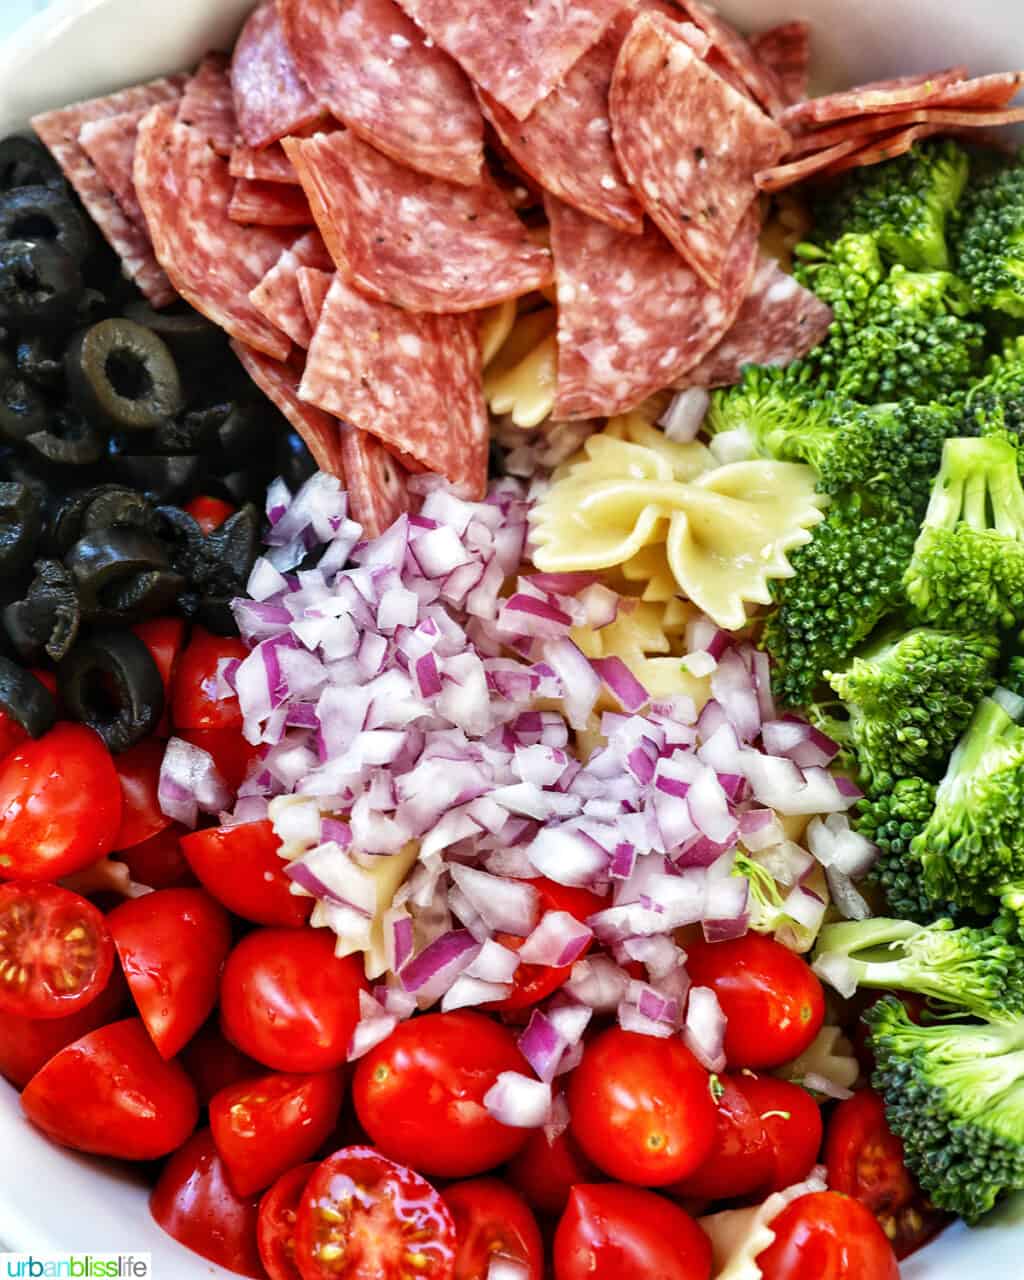 Ingredients to make italian bowtie pasta salad: tomatoes, red onions, broccoli, pasta, salami, and black olives.